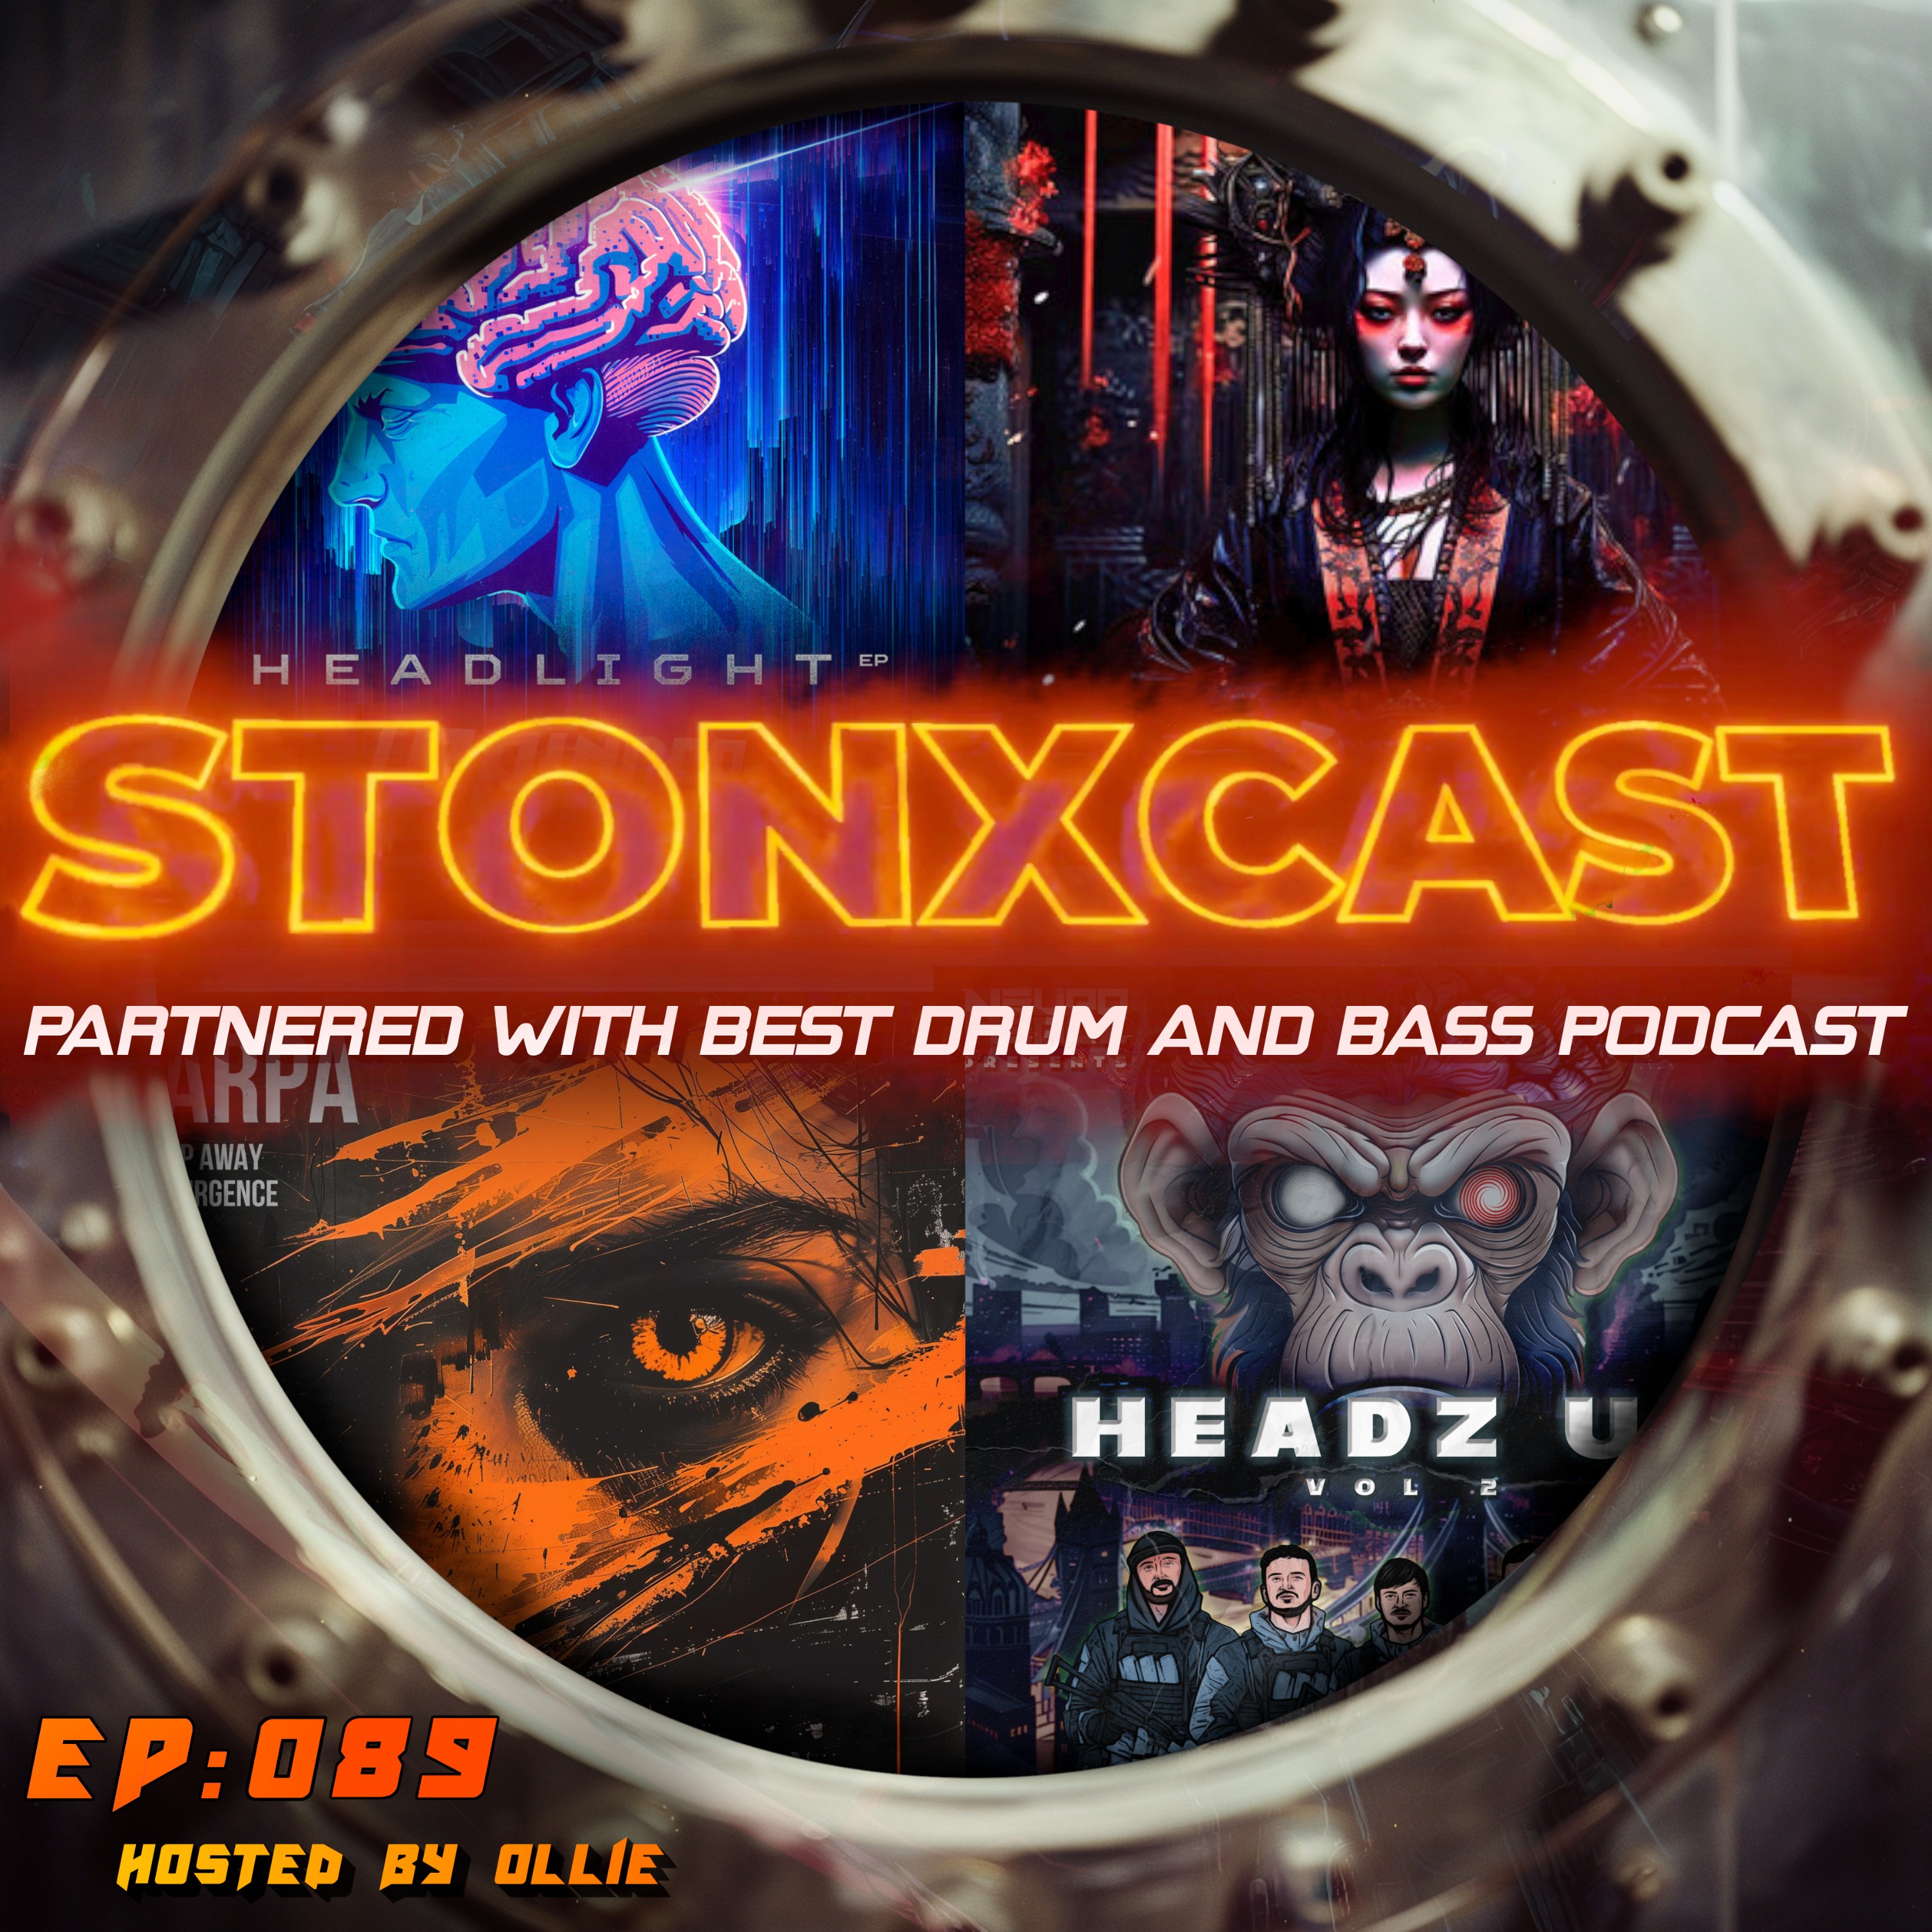 Stonxcast EP:089 - Hosted by Ollie Artwork